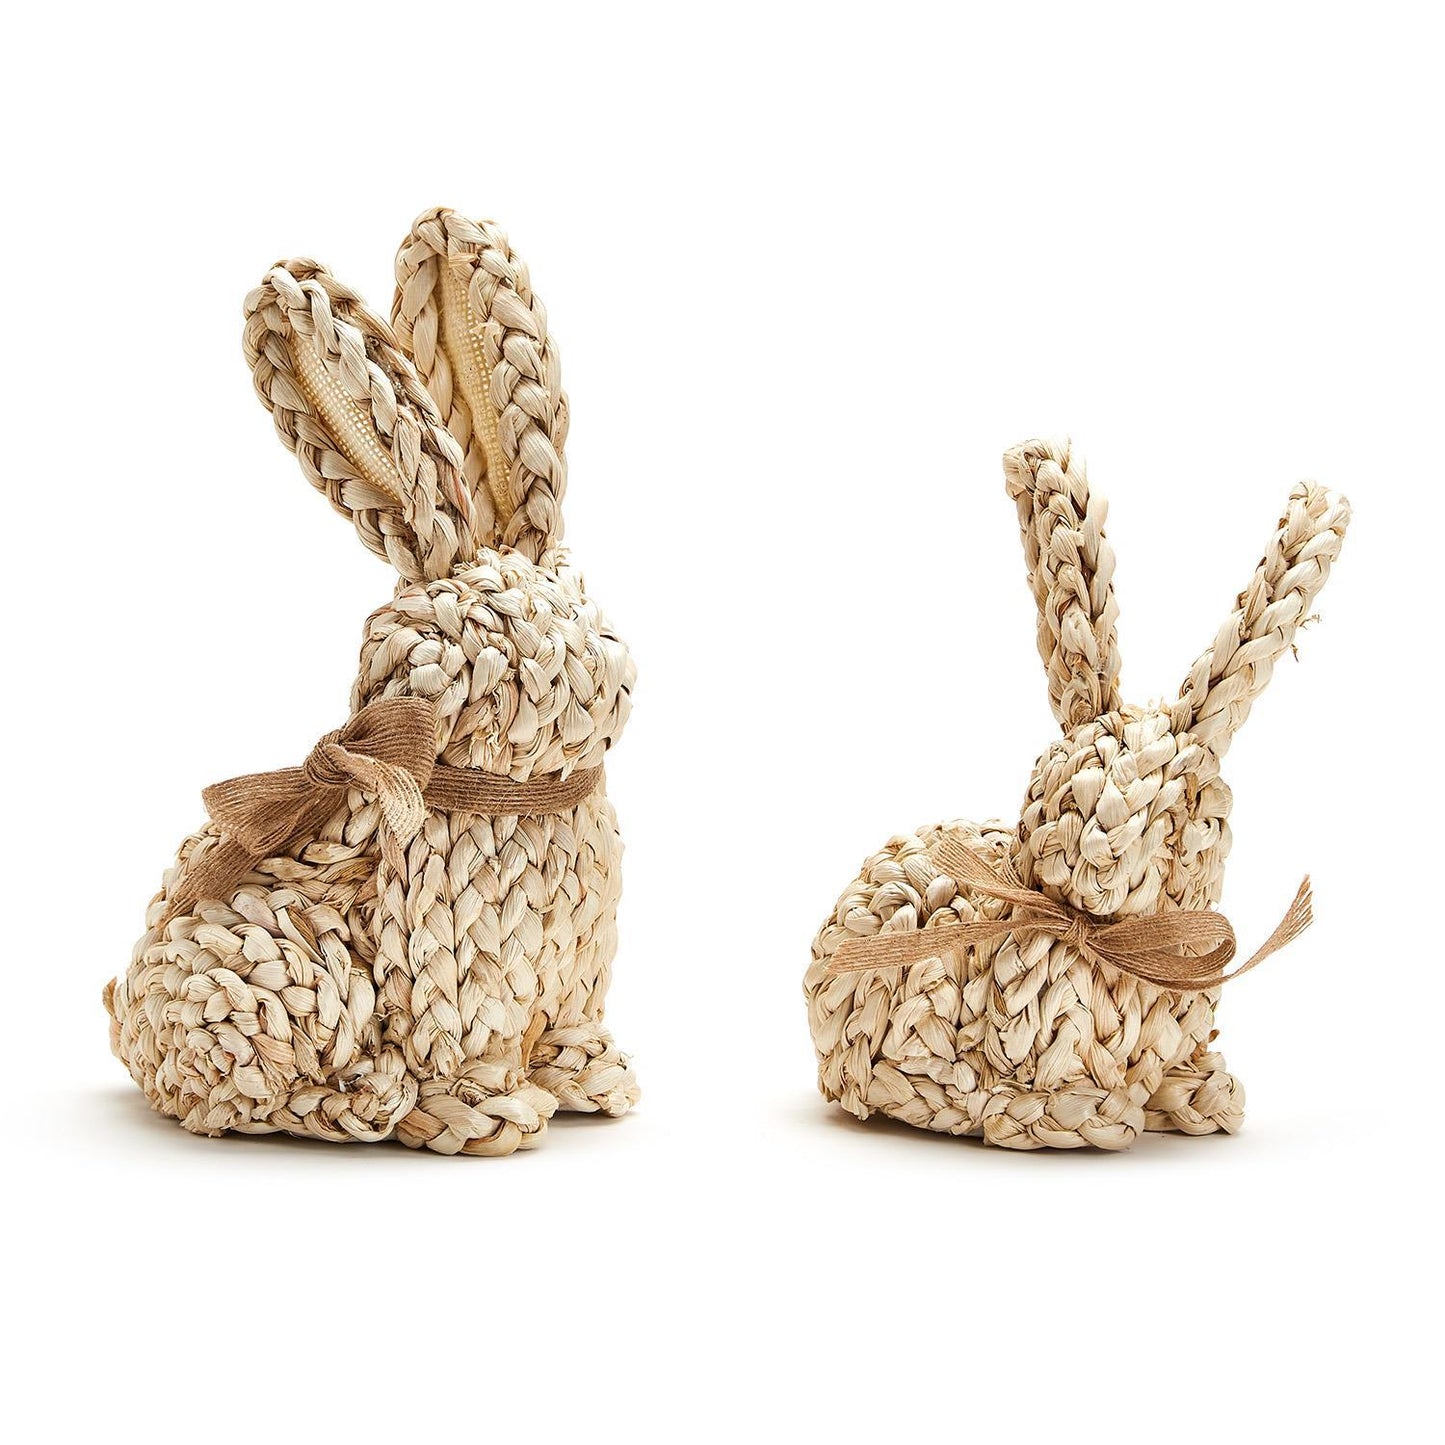 Hoppy Easter Set of 2 Hand-Crafted Easter Bunnies